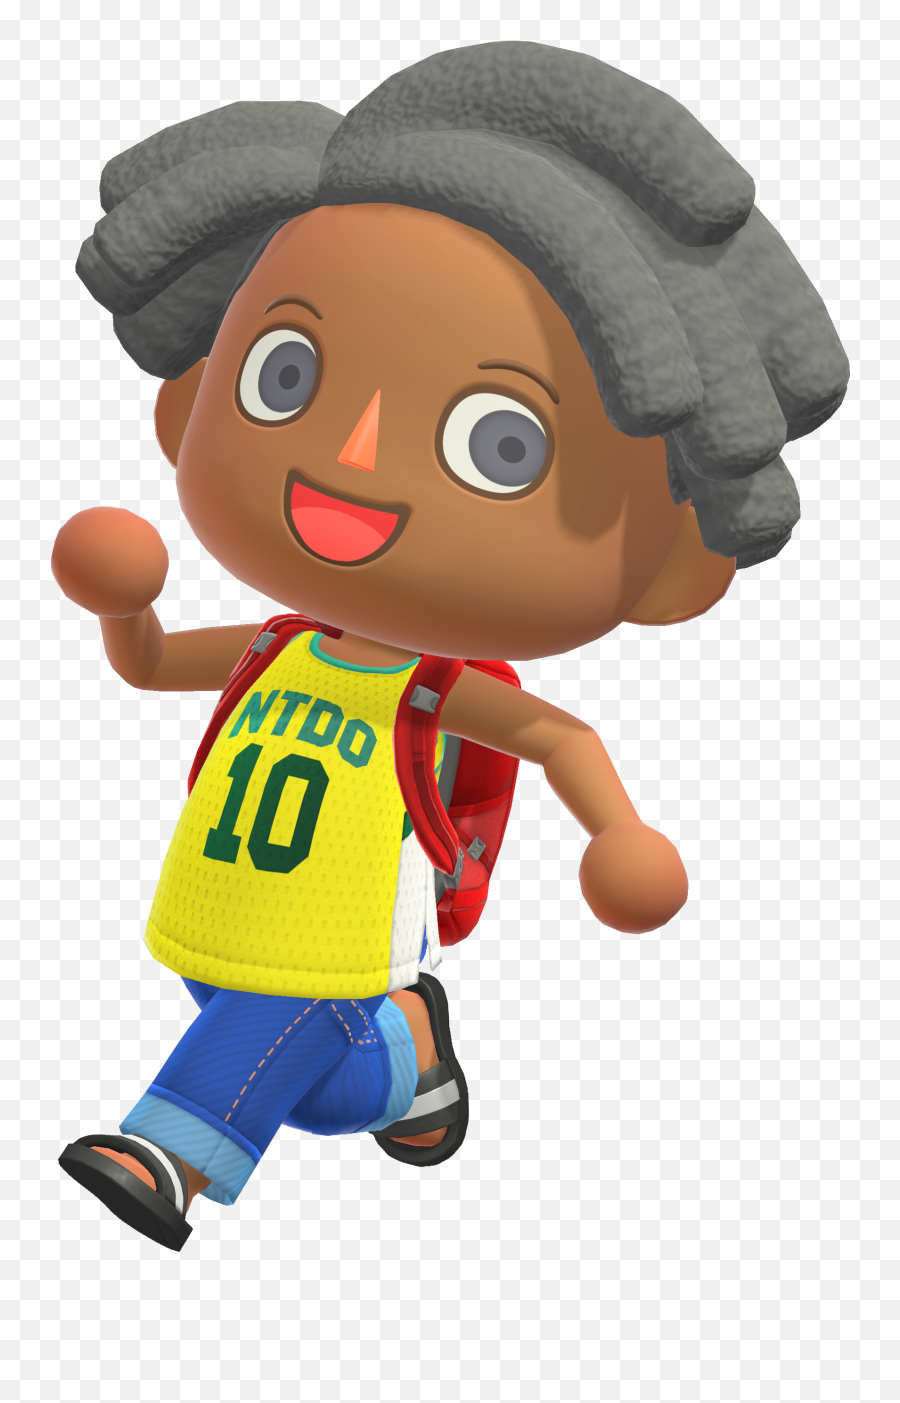 New Hairstyles Bags Flowers Revealed In Amazing Animal - Animal Crossing New Horizons Player Png Emoji,Animal Crossing Transparent